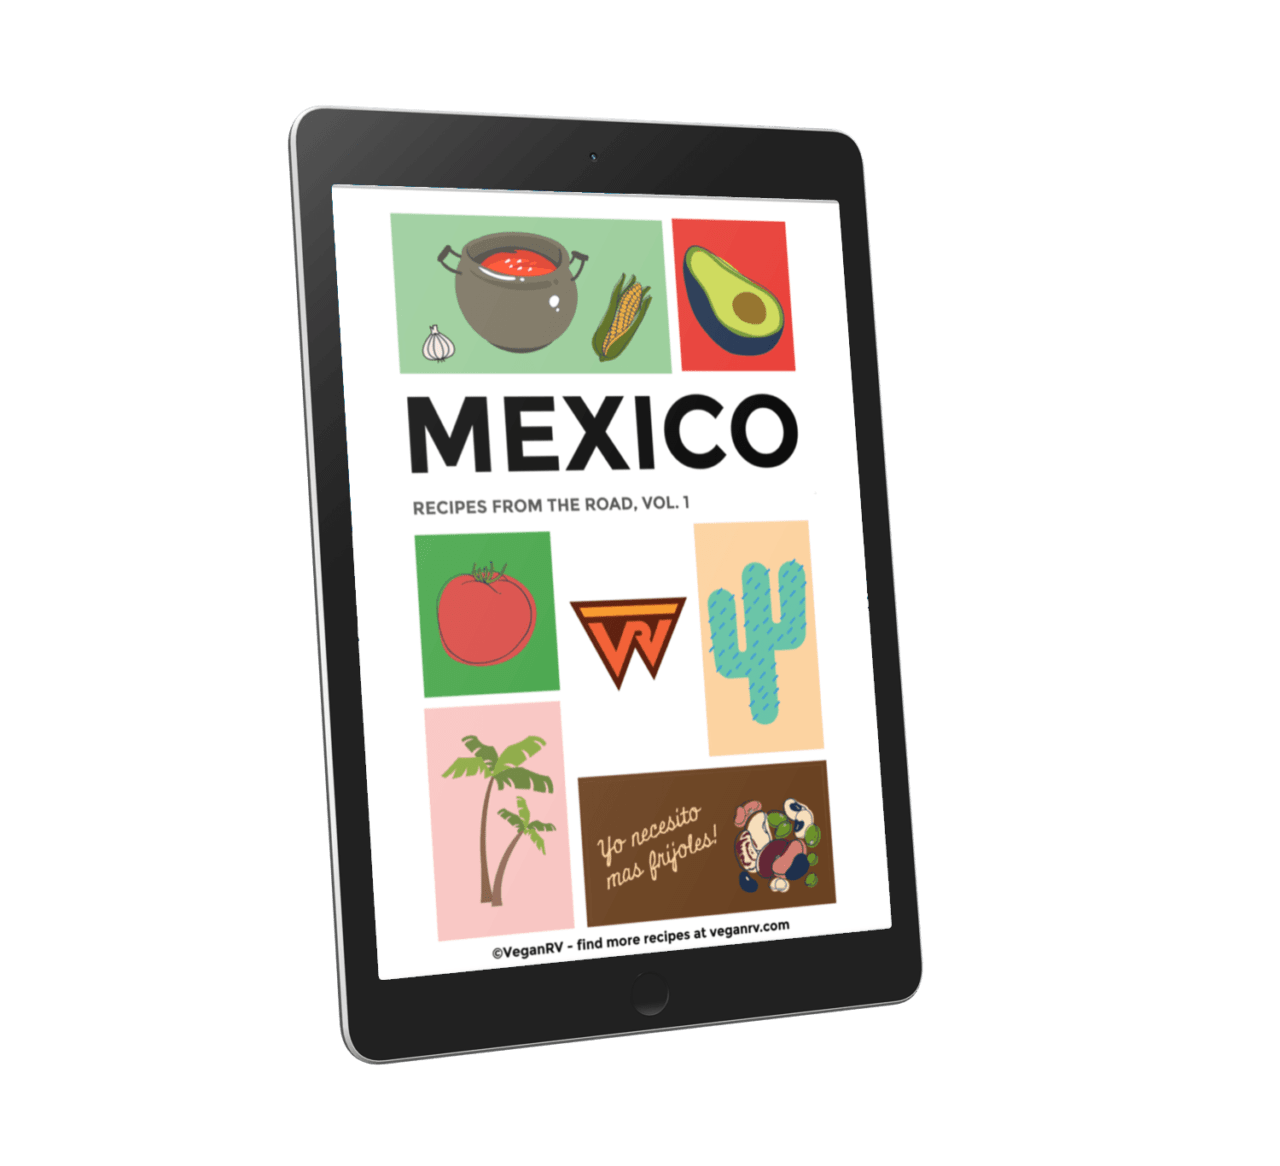 Mexico recipes from the road vol. 1 ebook.